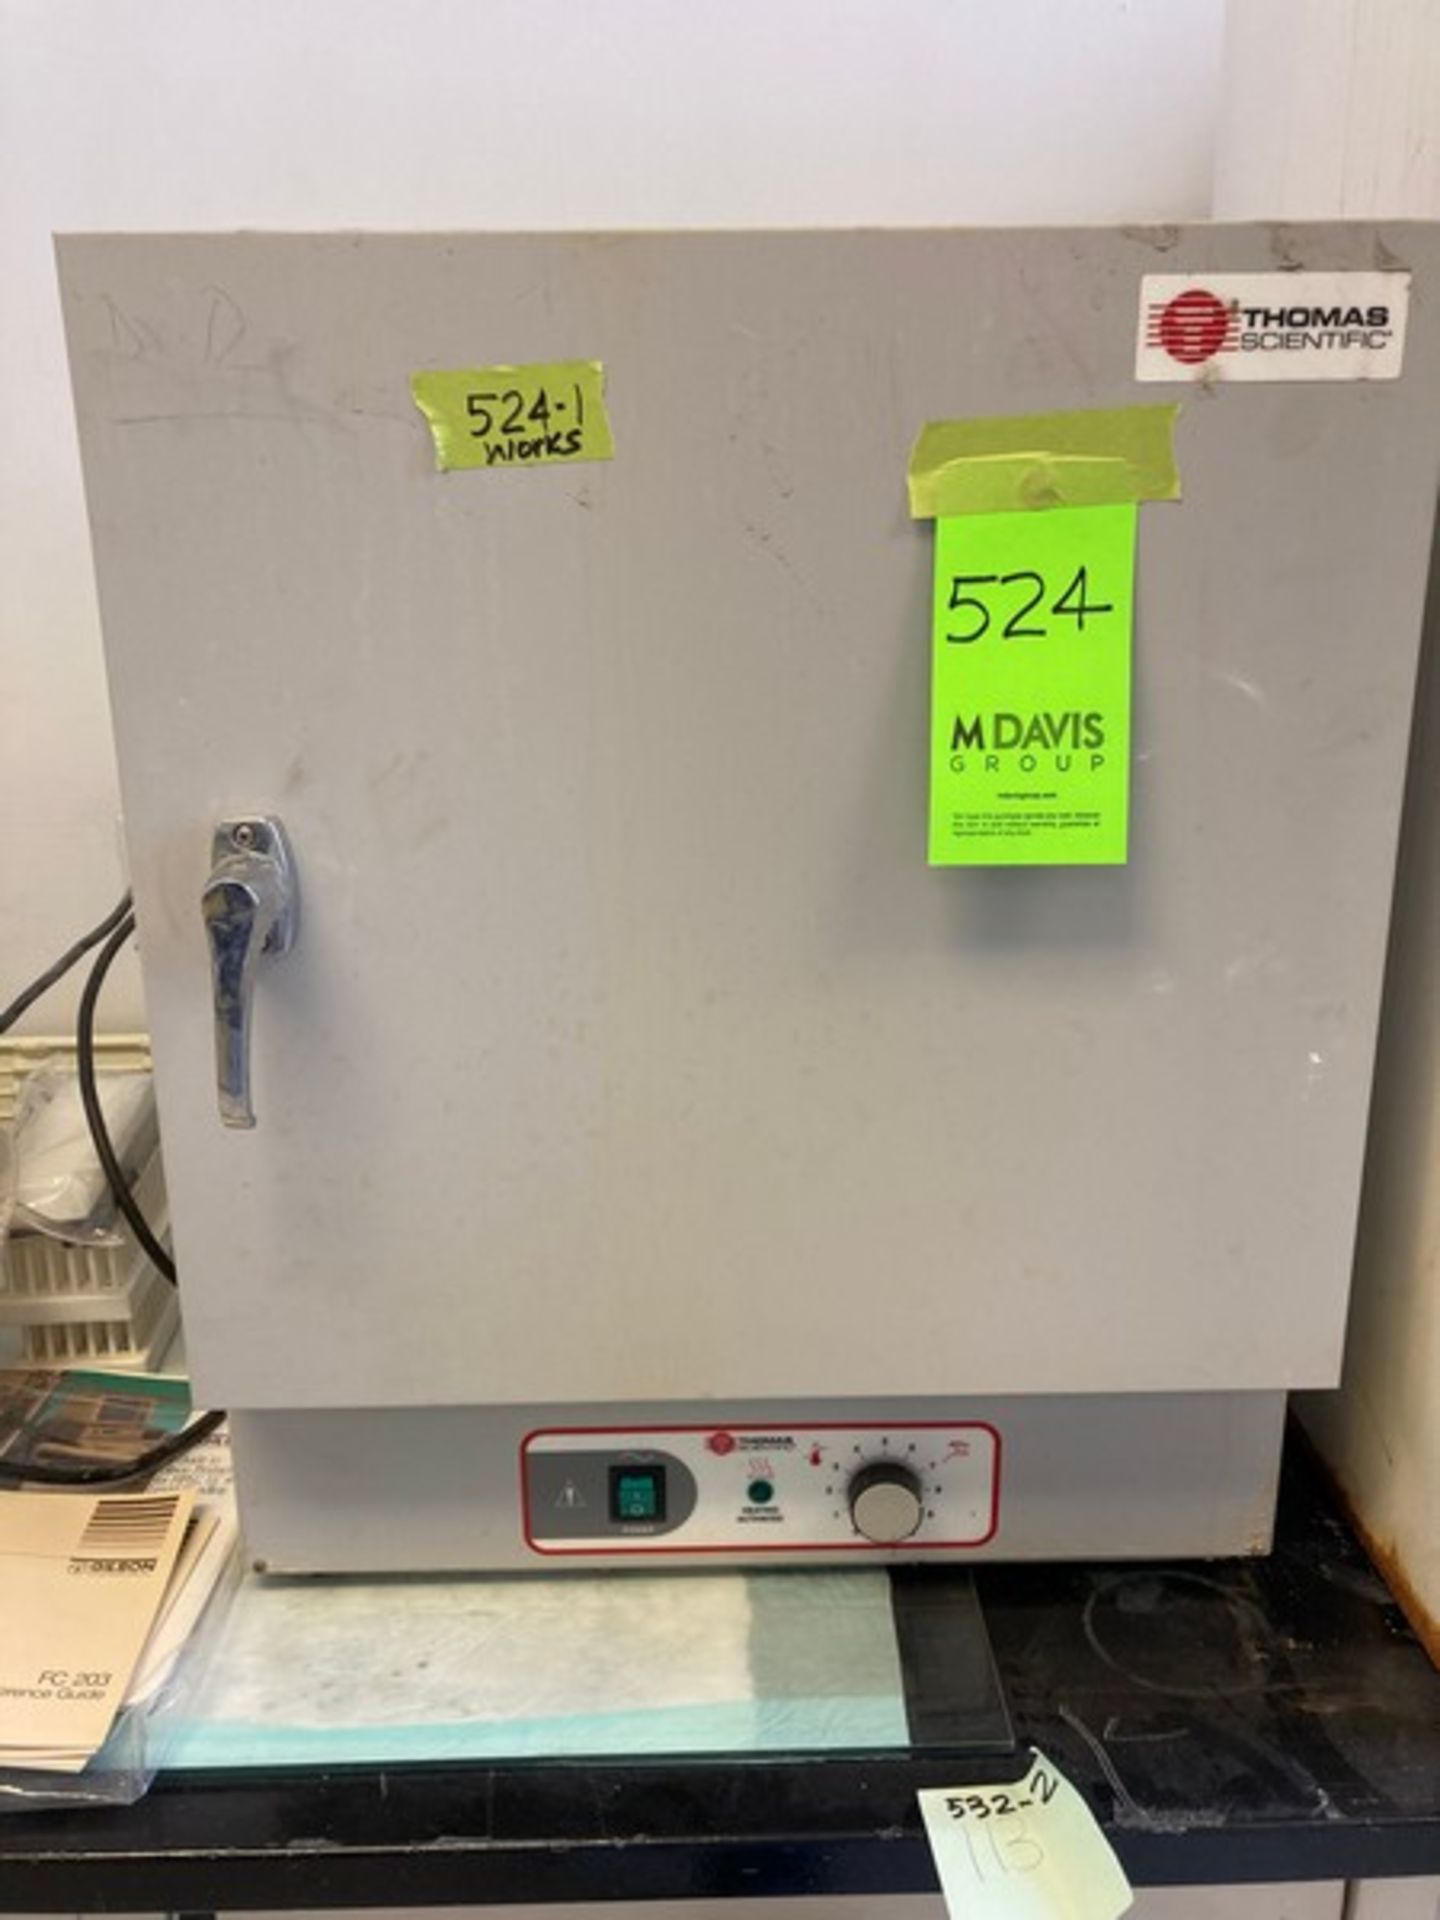 2 Lab items and Glassware: Explosion-Proof Refrigerator - Lab-Line Instruments 3557, 24"Wx24"Dx34. - Image 4 of 4